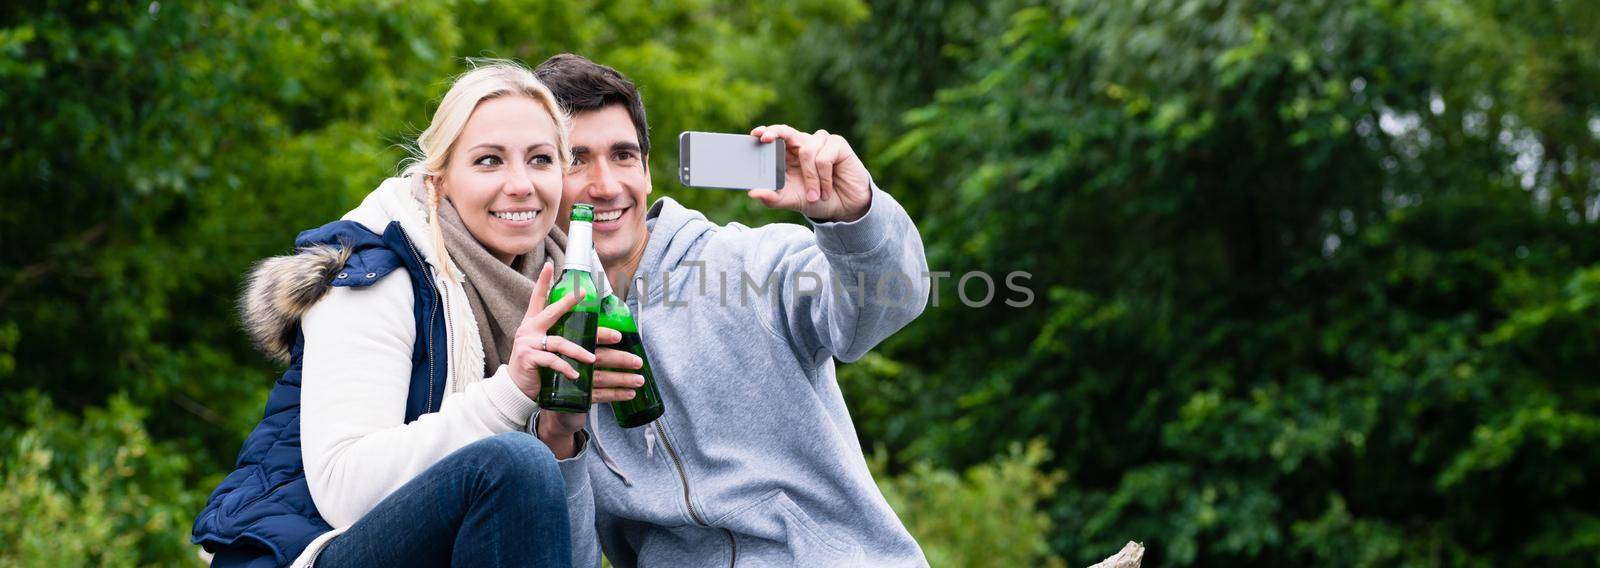 Woman and man drinking beer taking selfie while hiking in forest